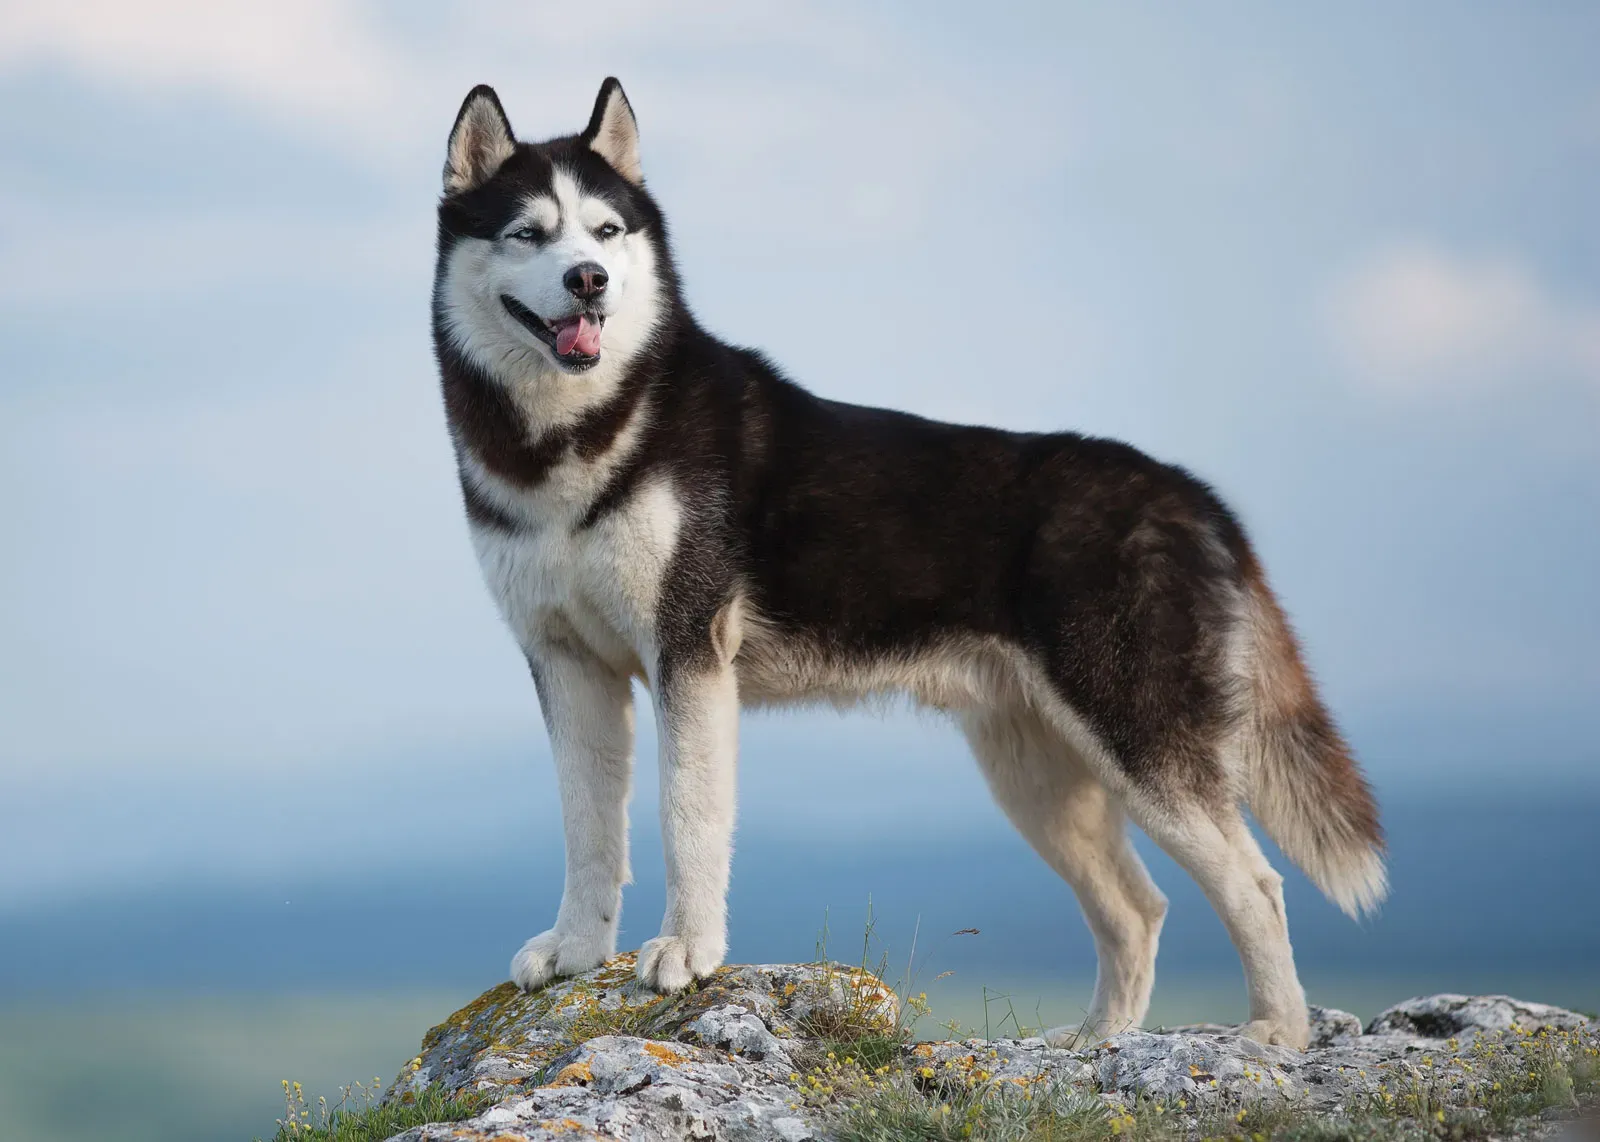 How Much Exercise Does a Husky Need